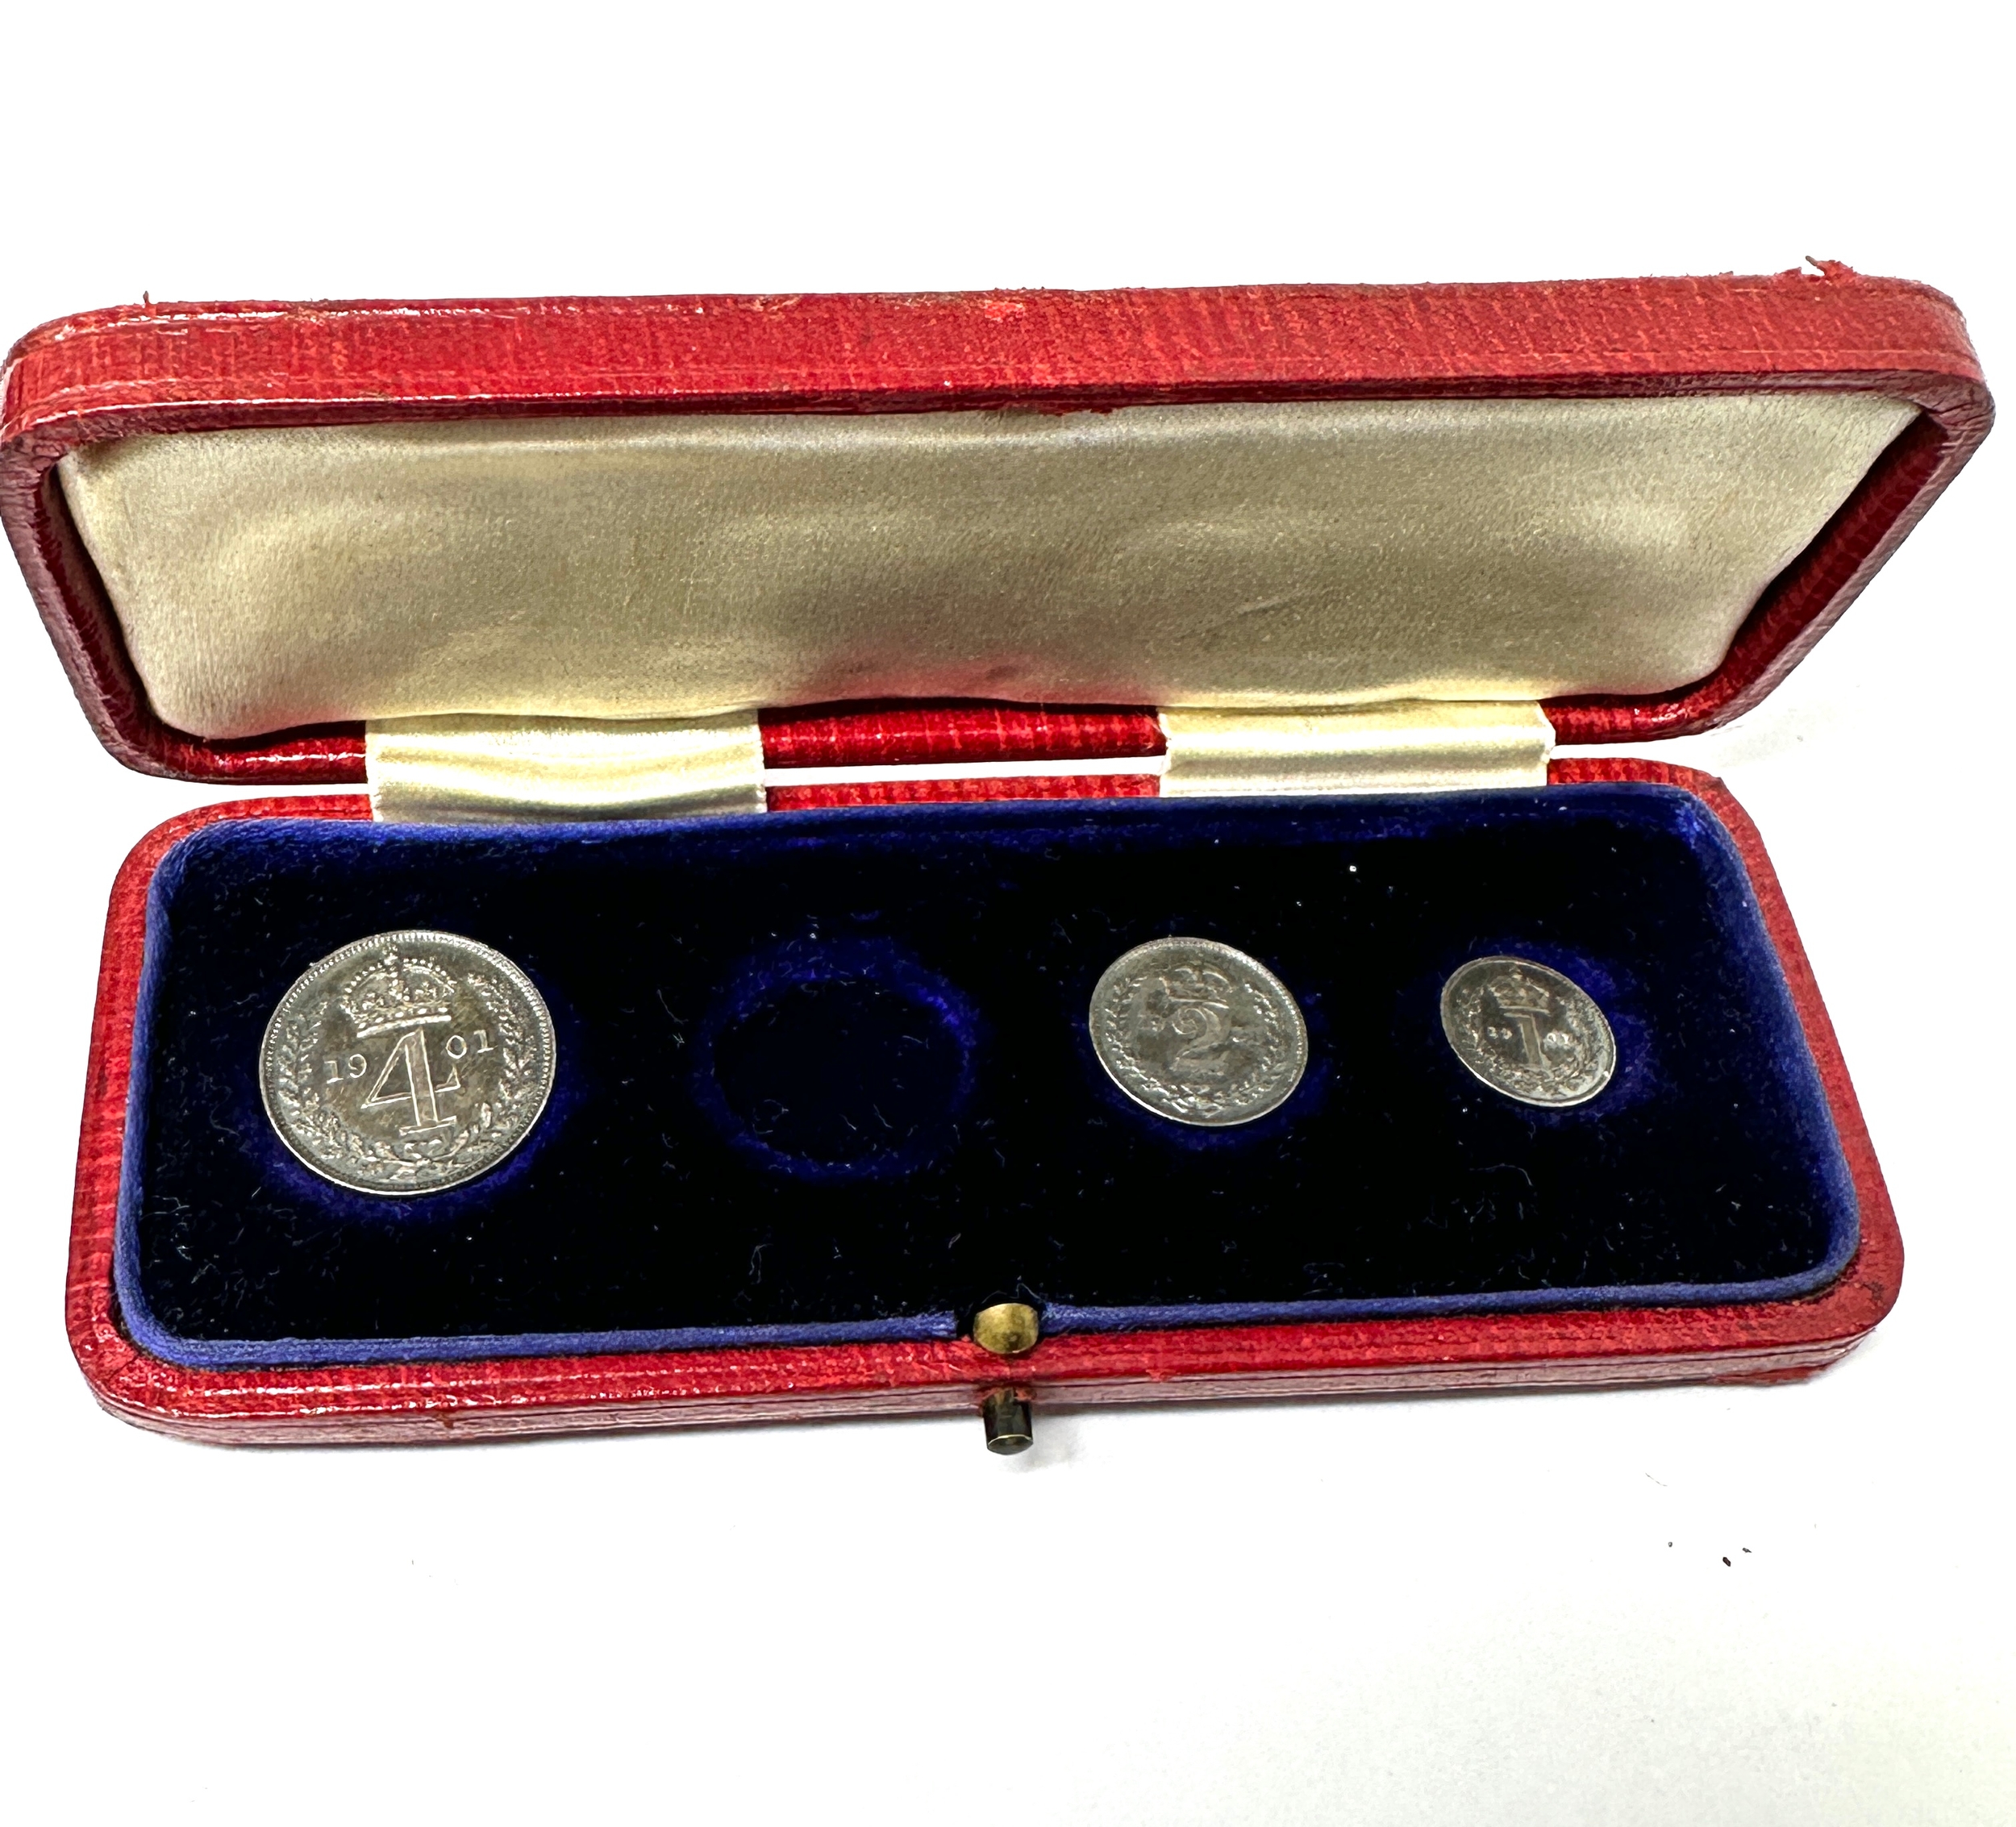 Part Queen Victoria Maundy Coin Set In Original Display Box 1901 UNC Condition missing 3 pence coin